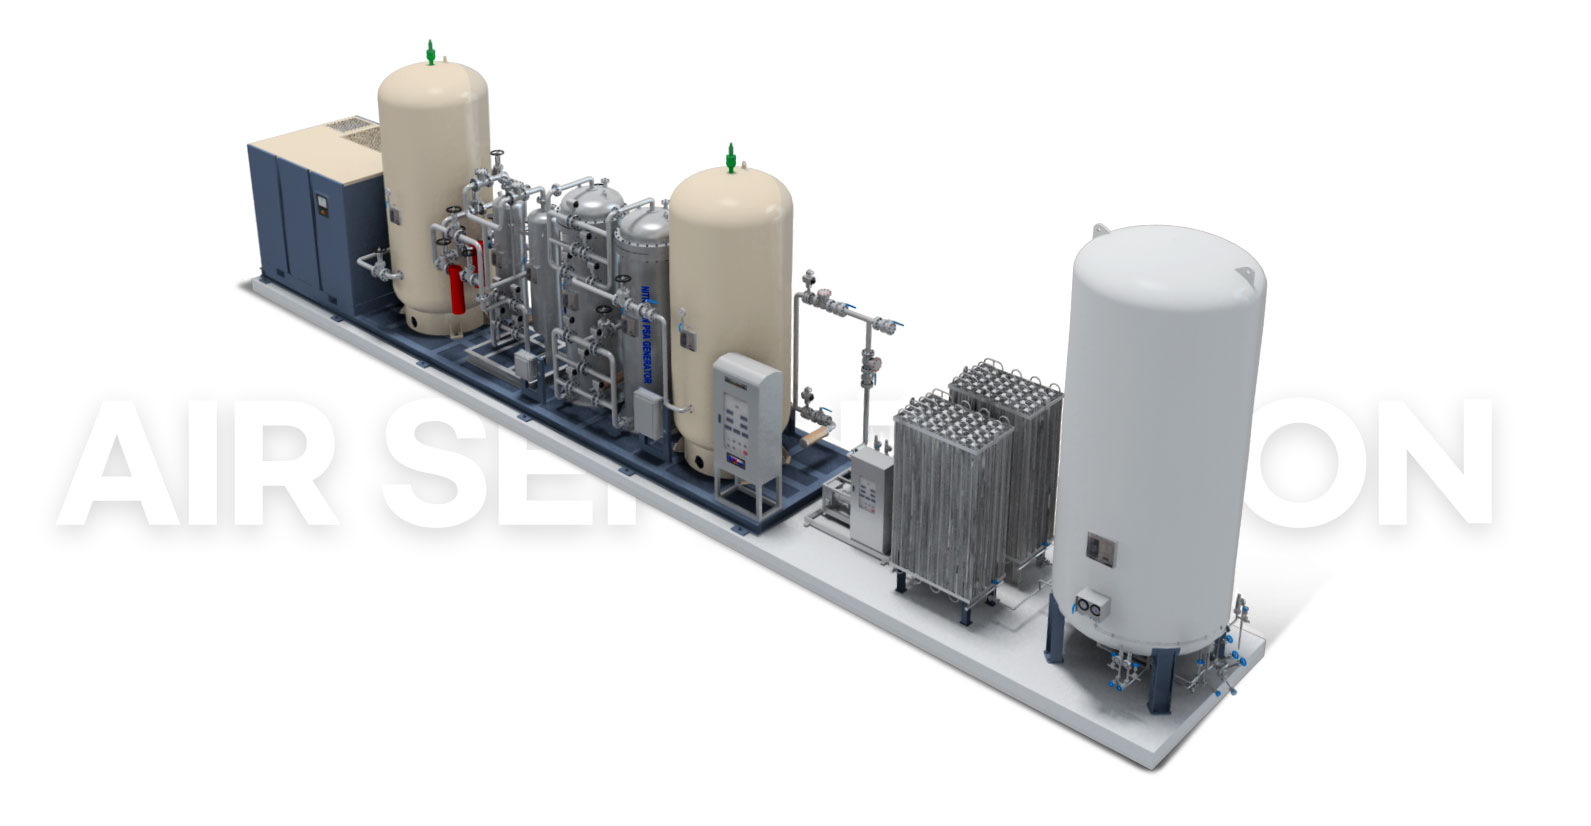 Aspe offers effective N2 PSA Package solutions through its expertise in PSA Oxygen Generation and soec electrolysis.